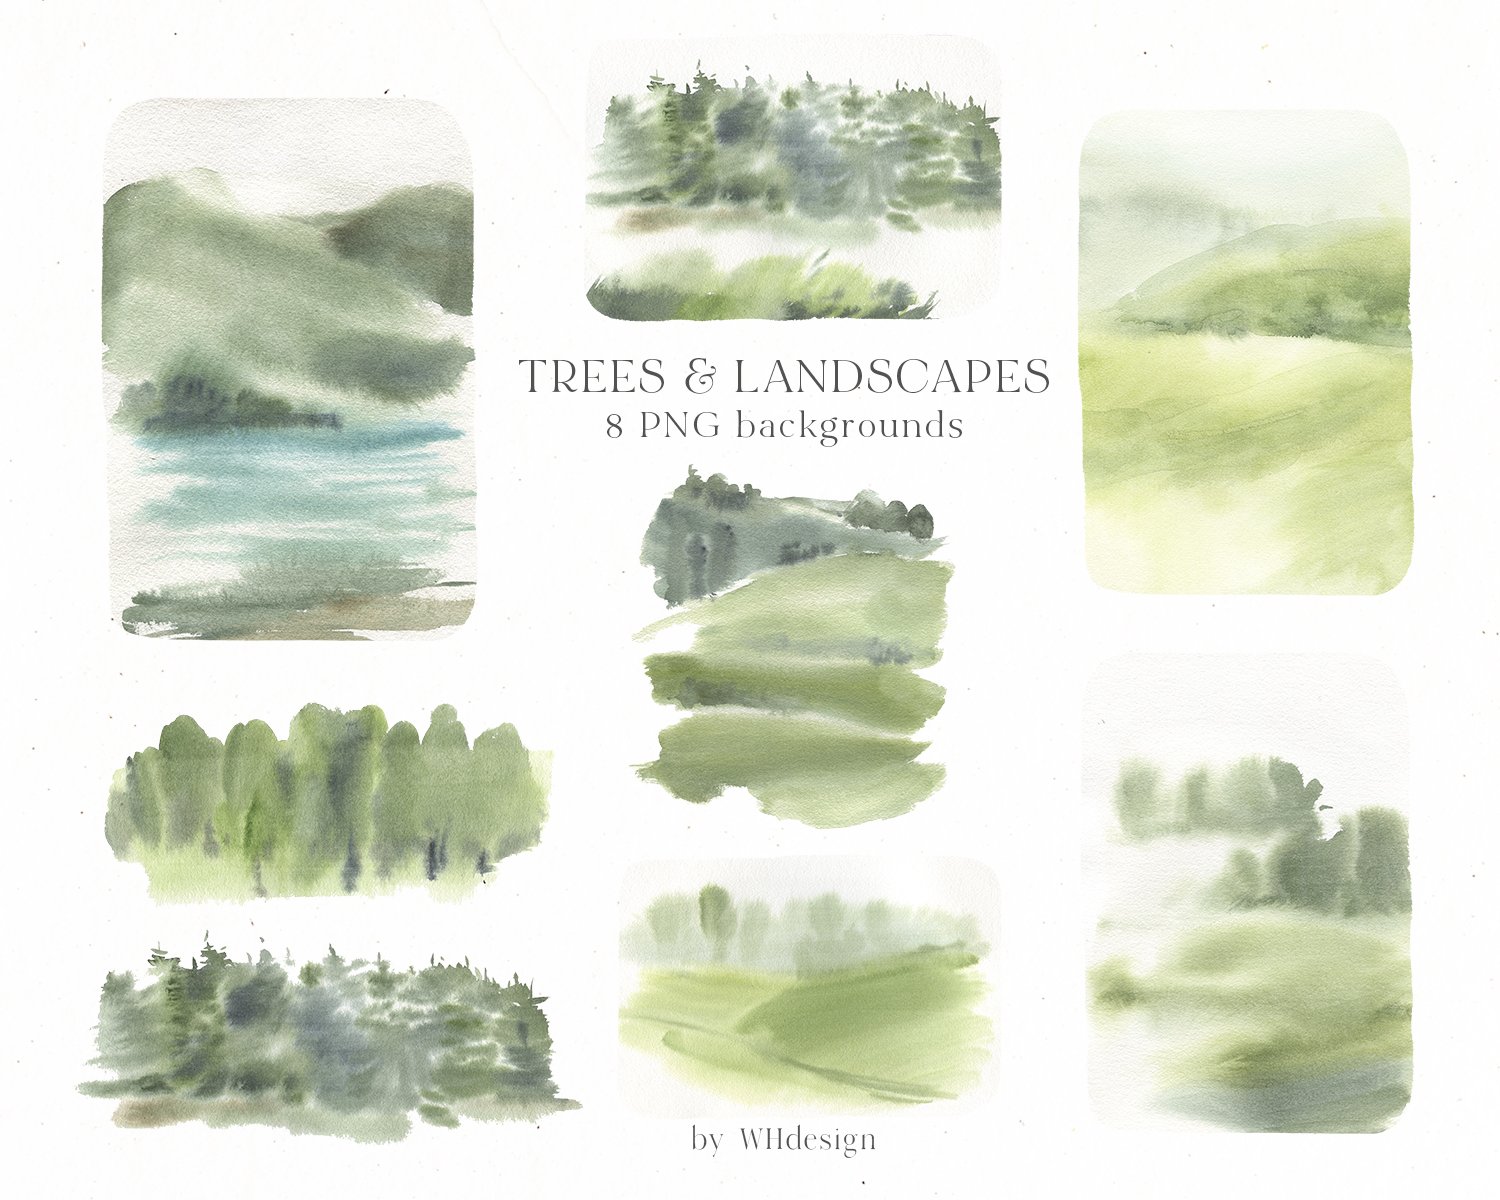 Book cover with watercolor trees and landscapes.